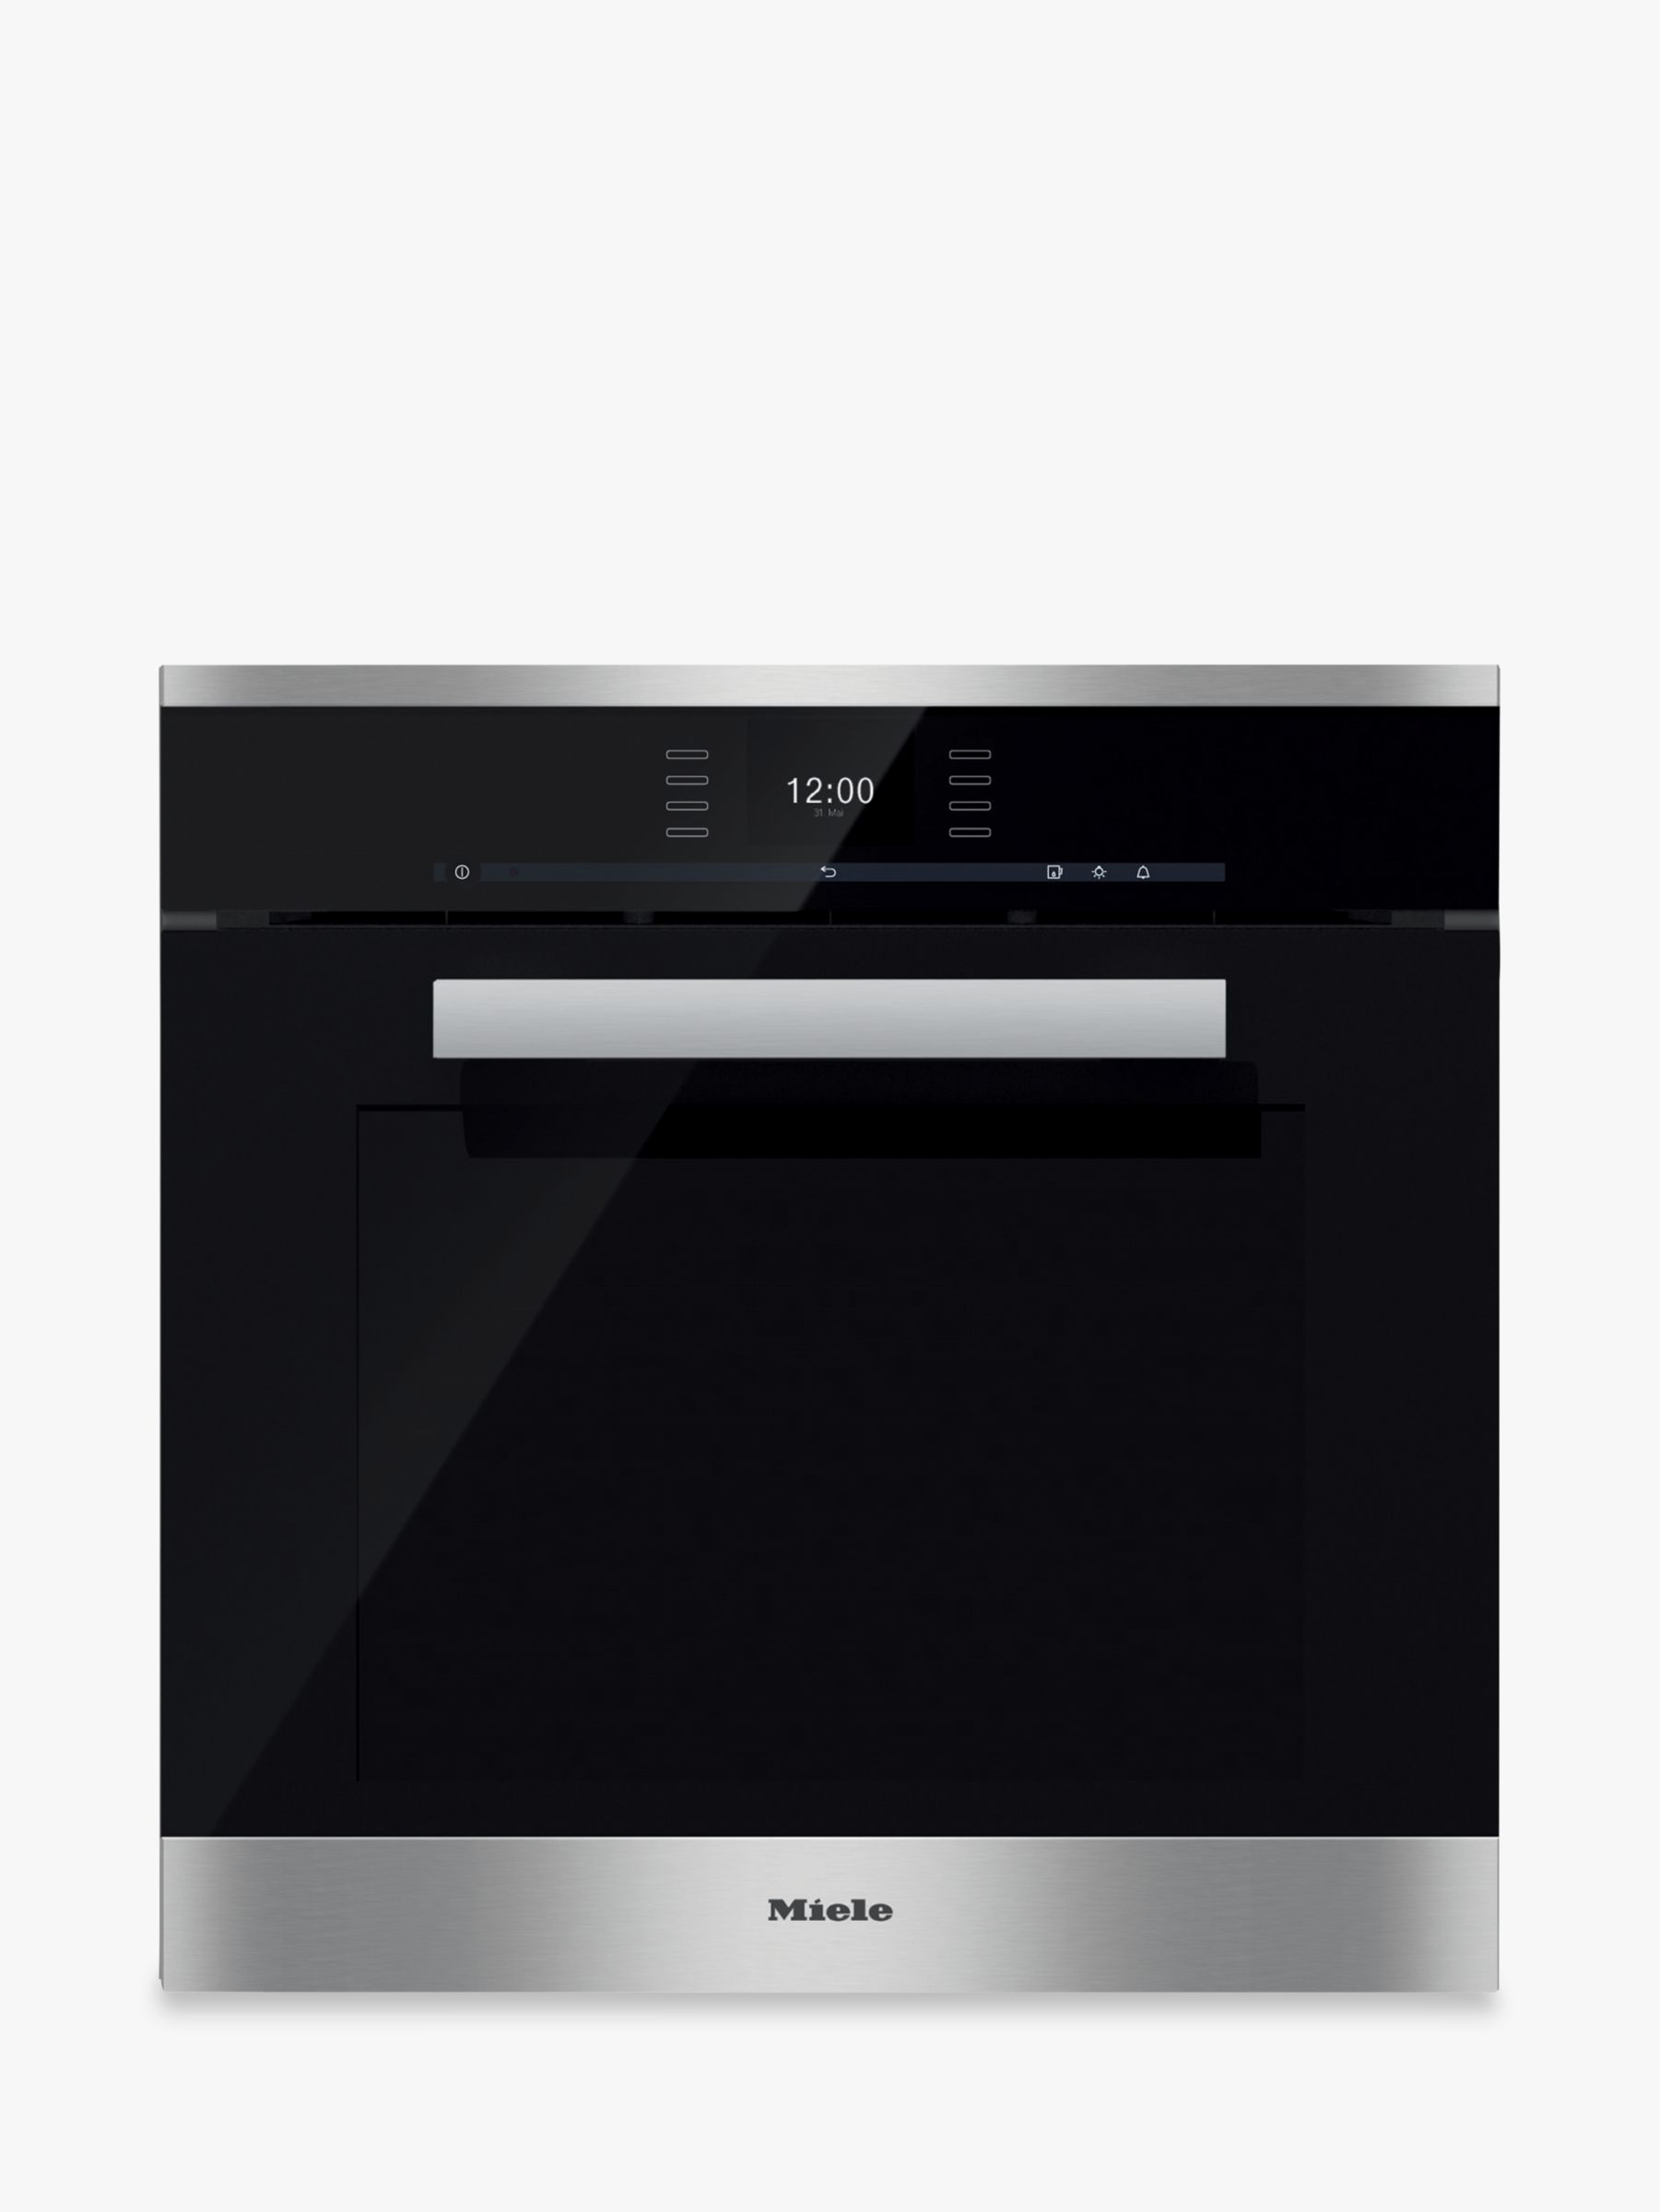 Miele DGC6660XXL Multifunction Single Oven with Steam, Clean Steel